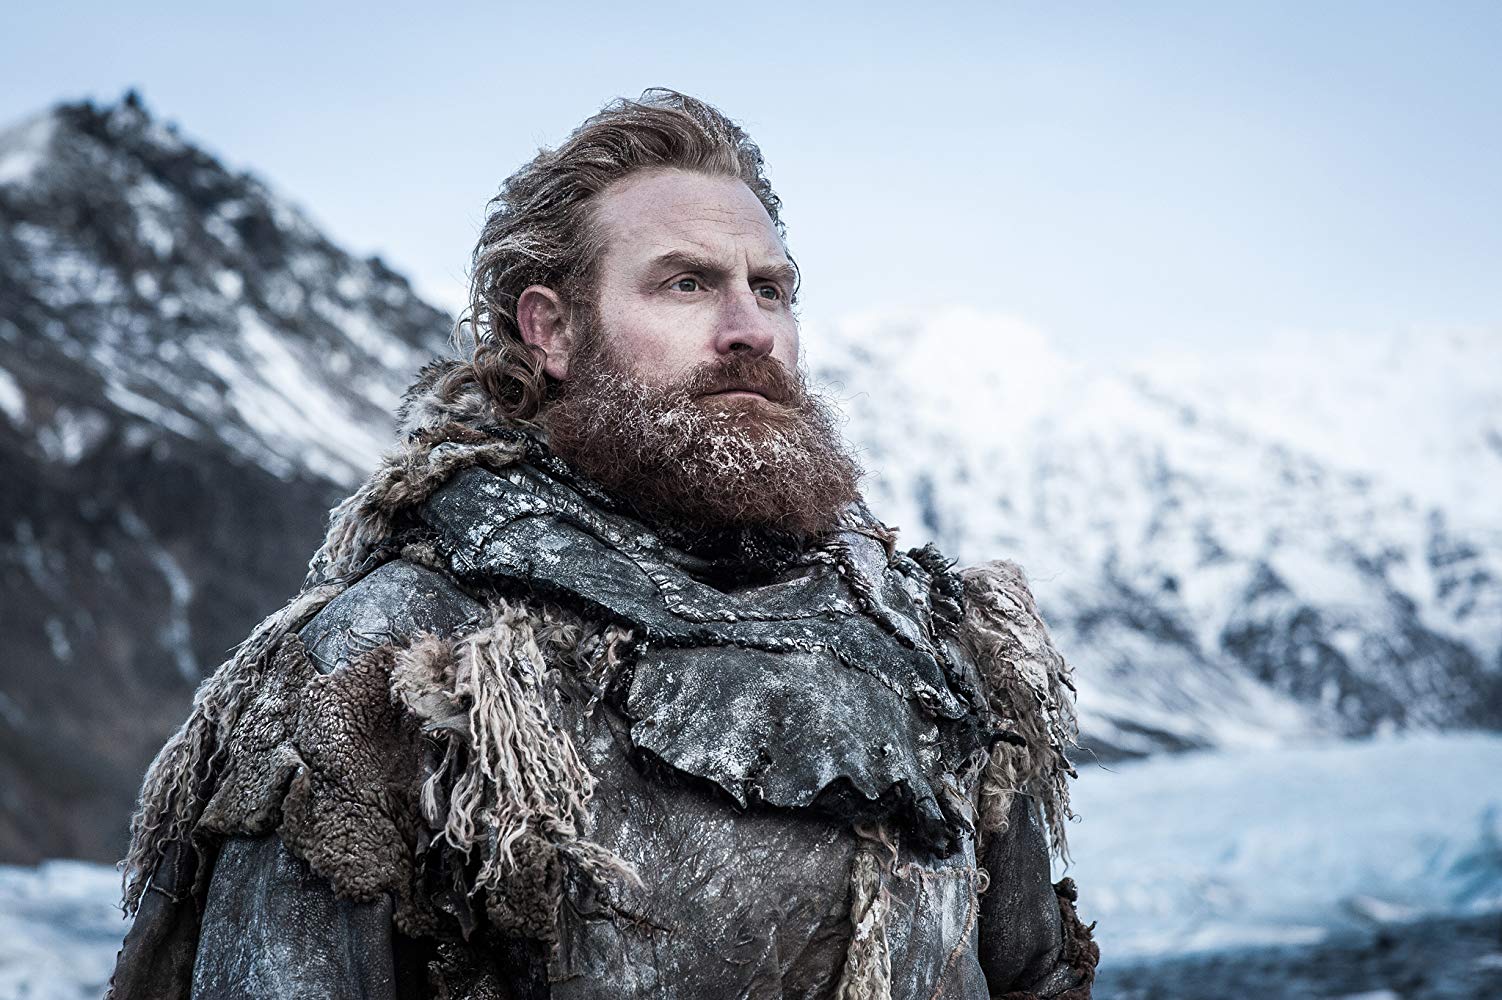 Tormund from Game of Thrones